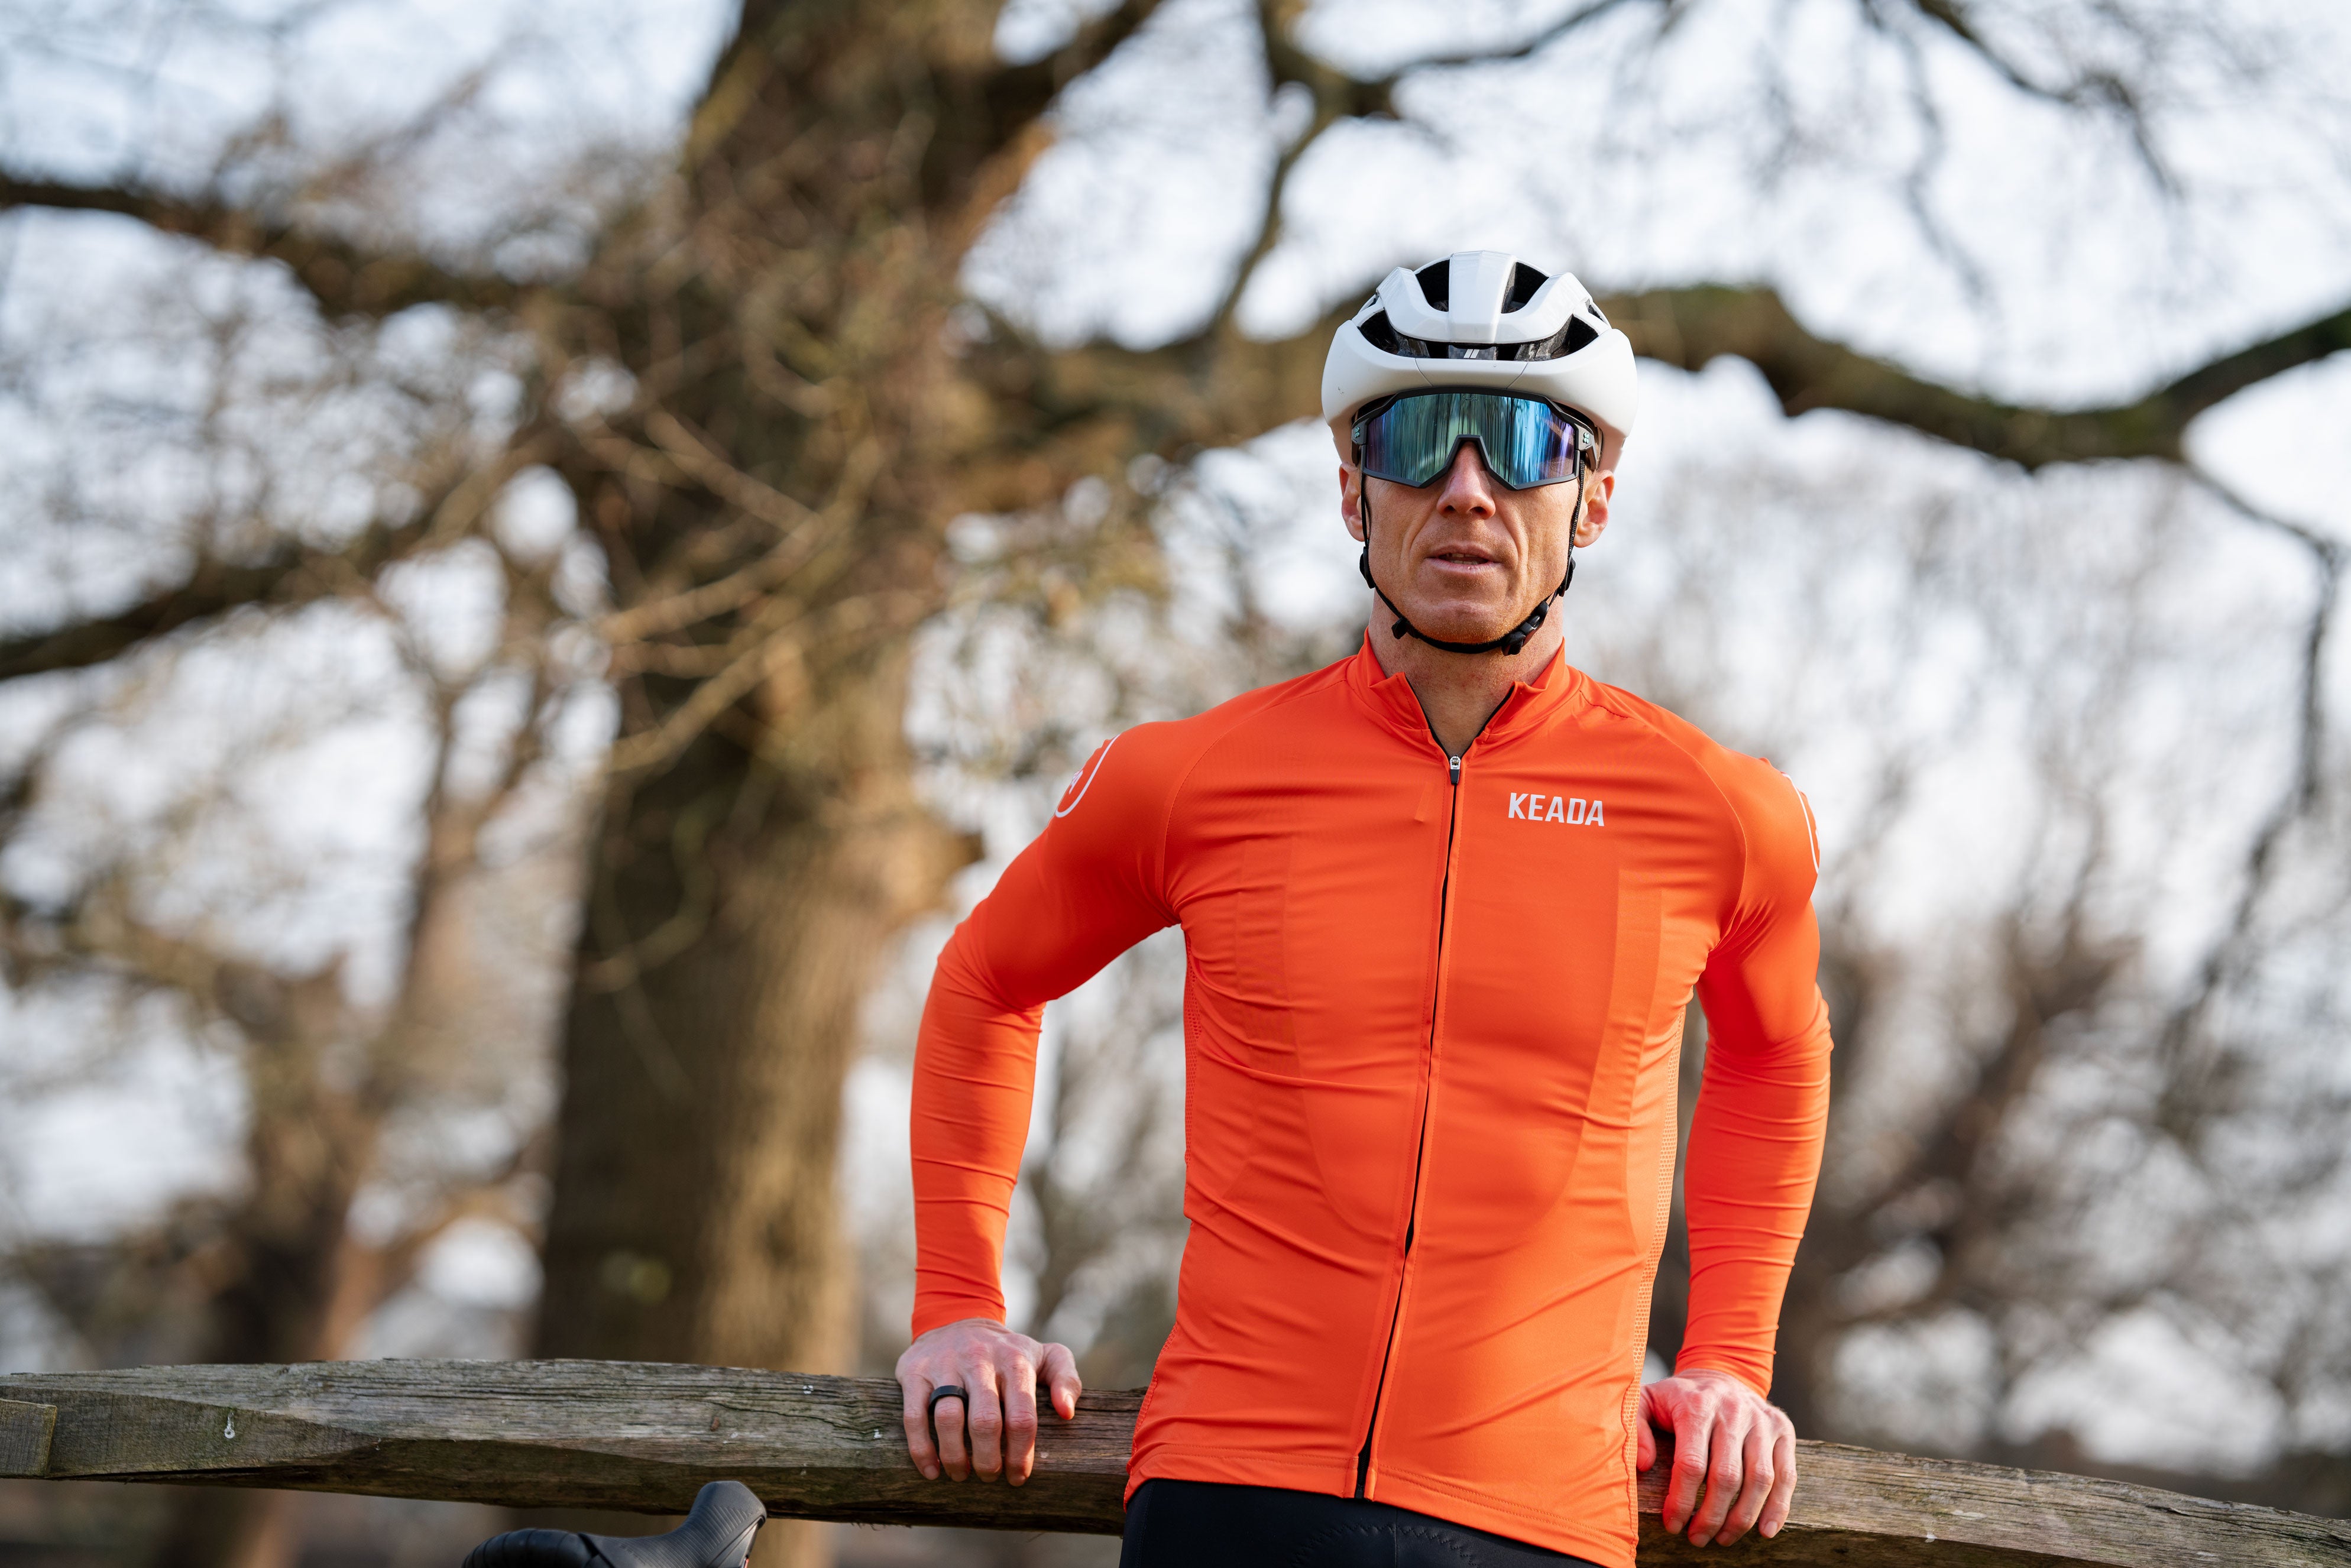 Men's Essential Long Sleeved Cycling Jersey - Orange